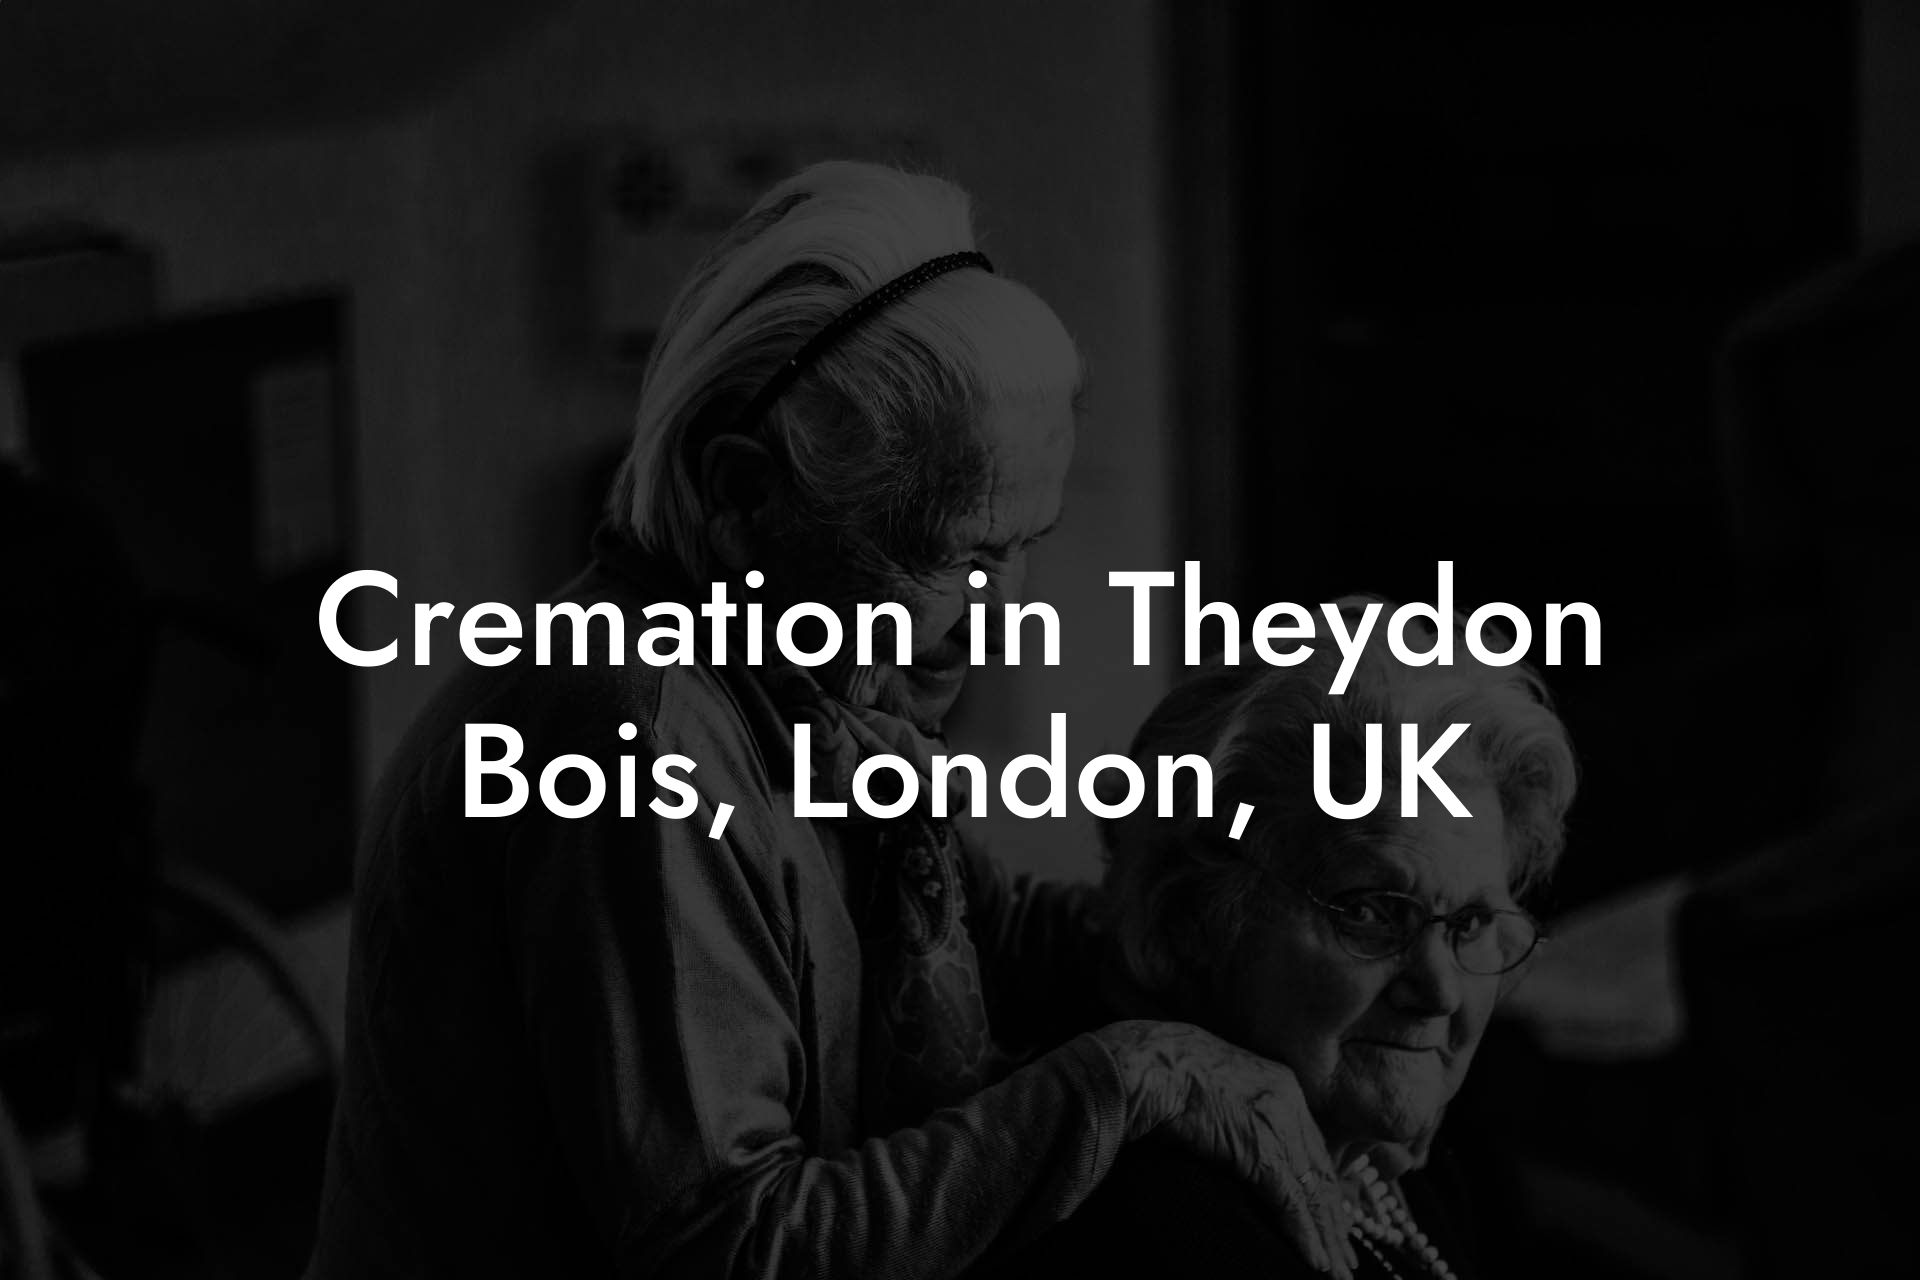 Cremation in Theydon Bois, London, UK